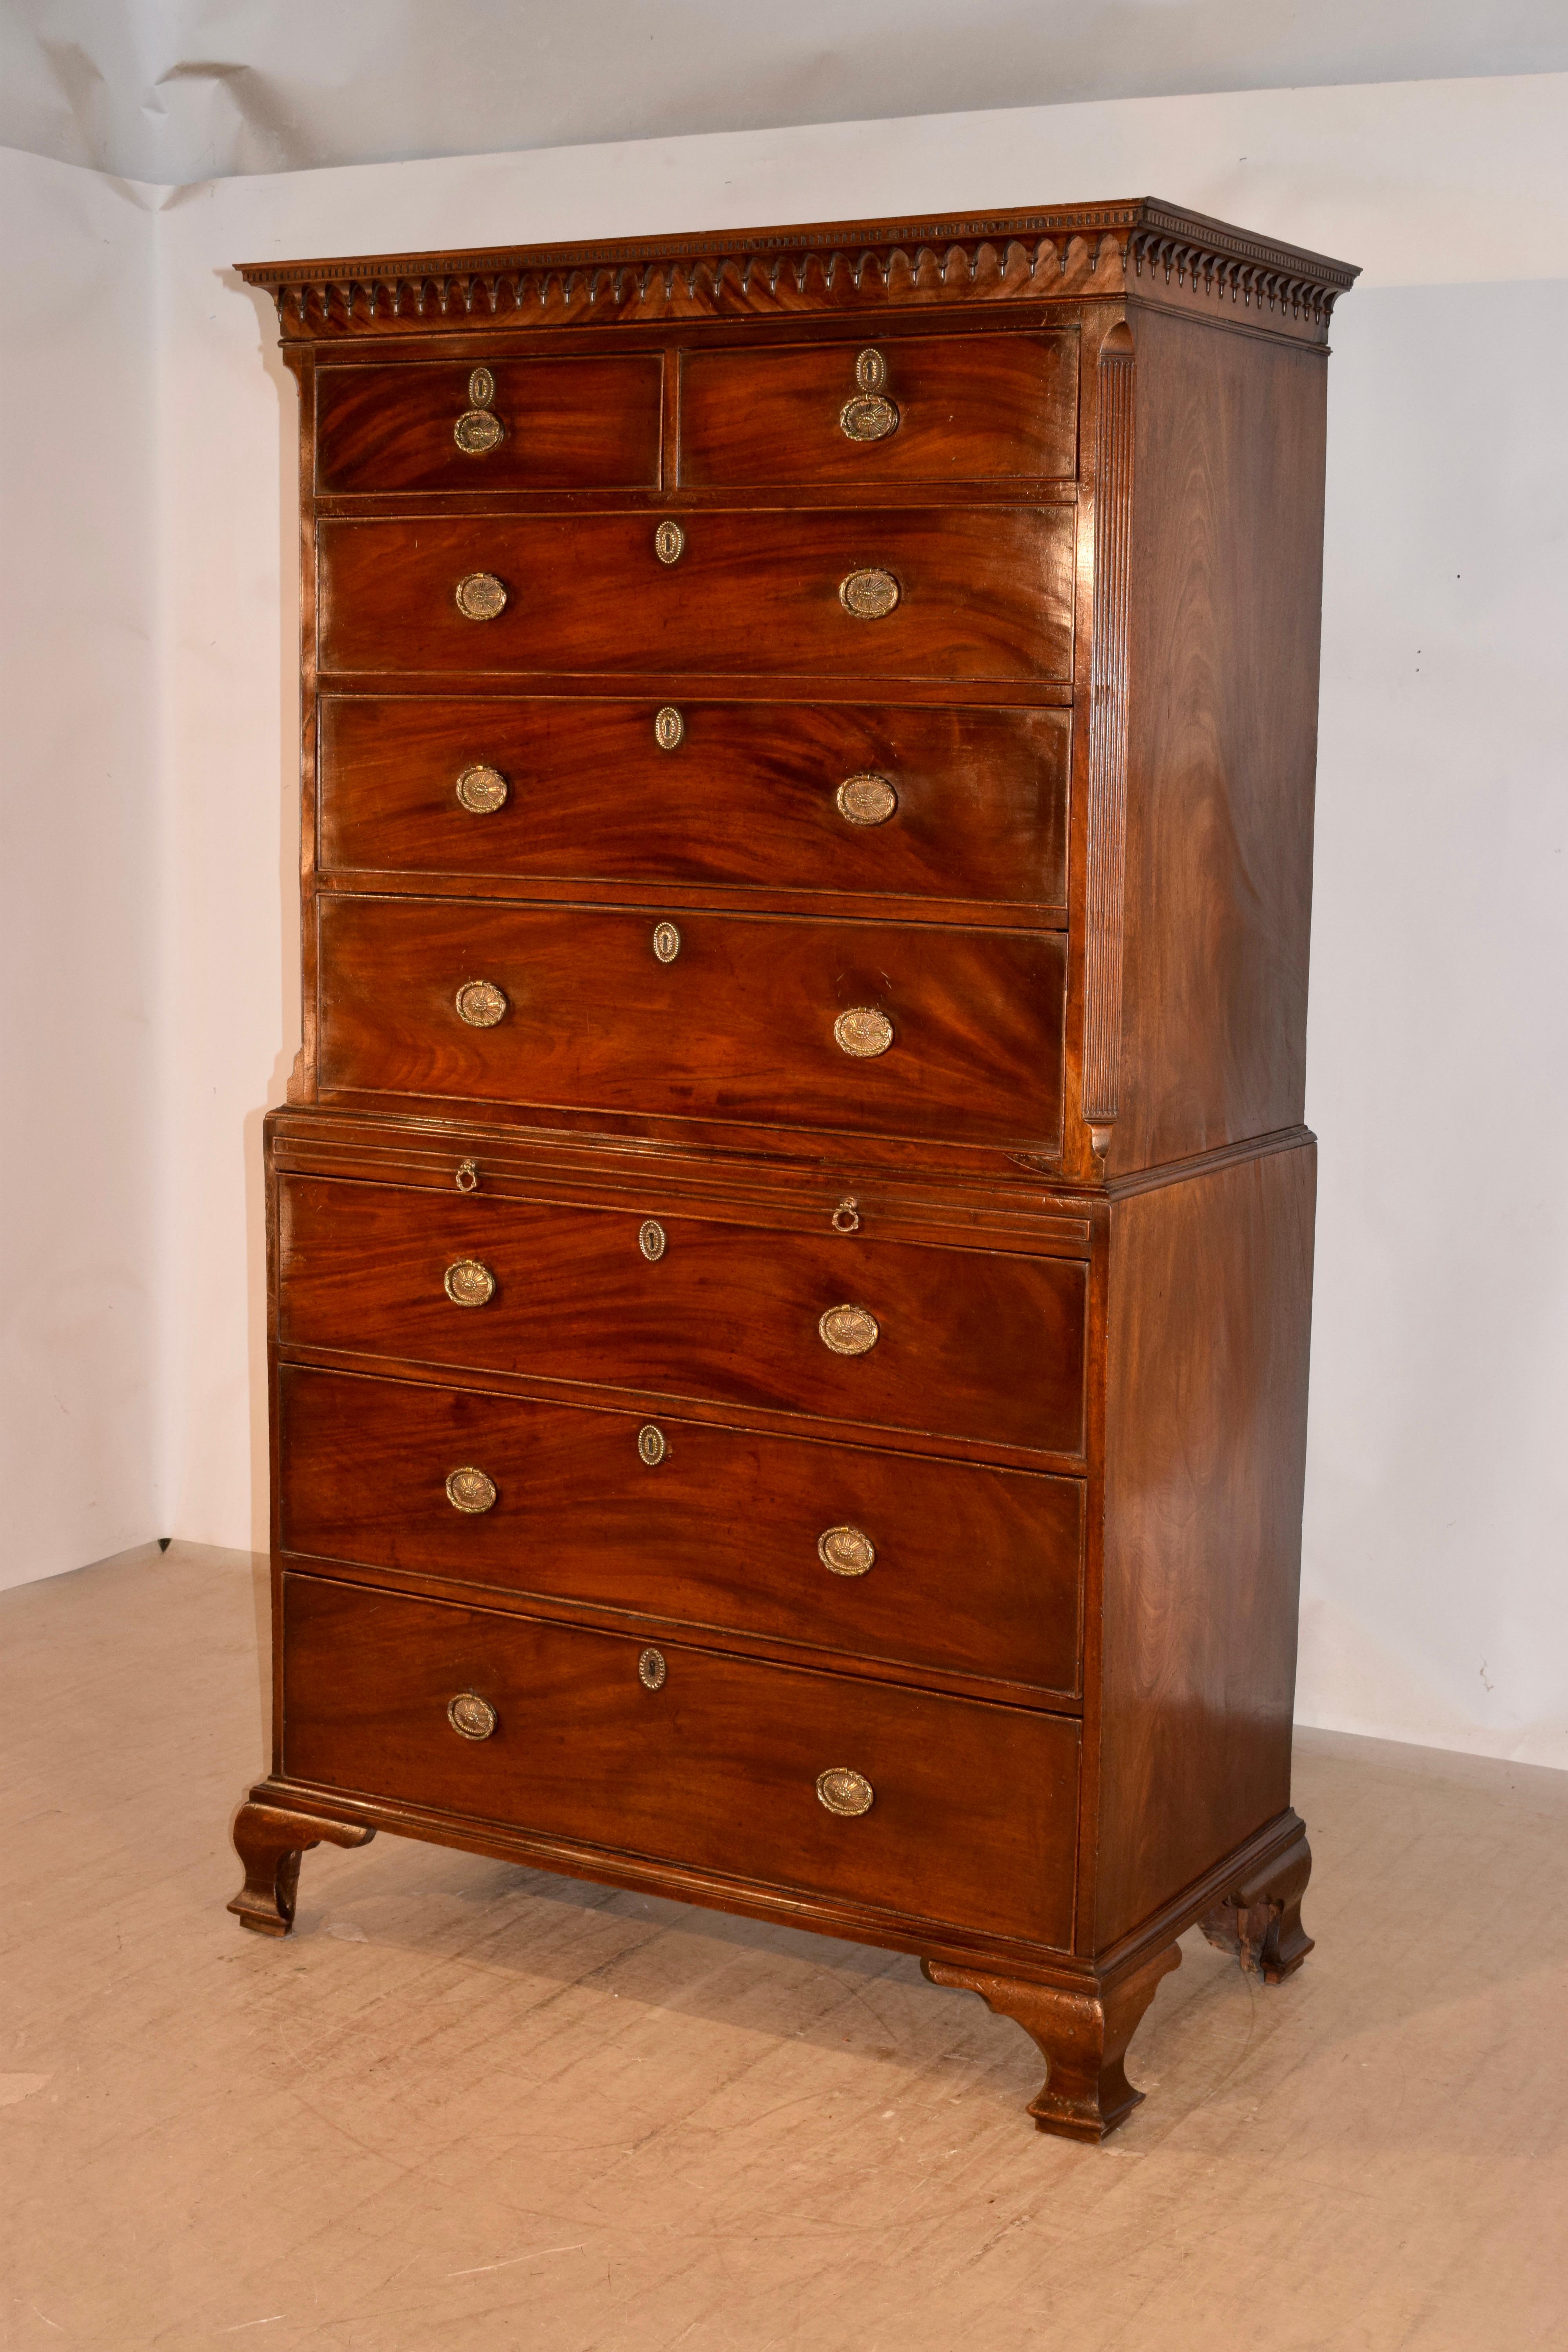 18th century mahogany chest on chest from England. There is a dentil moulding, over an arched cove moulding. This chest is of exceptional quality. The sides are made from mahogany as well as the front, which is unusual. A lot of cabinet makers would